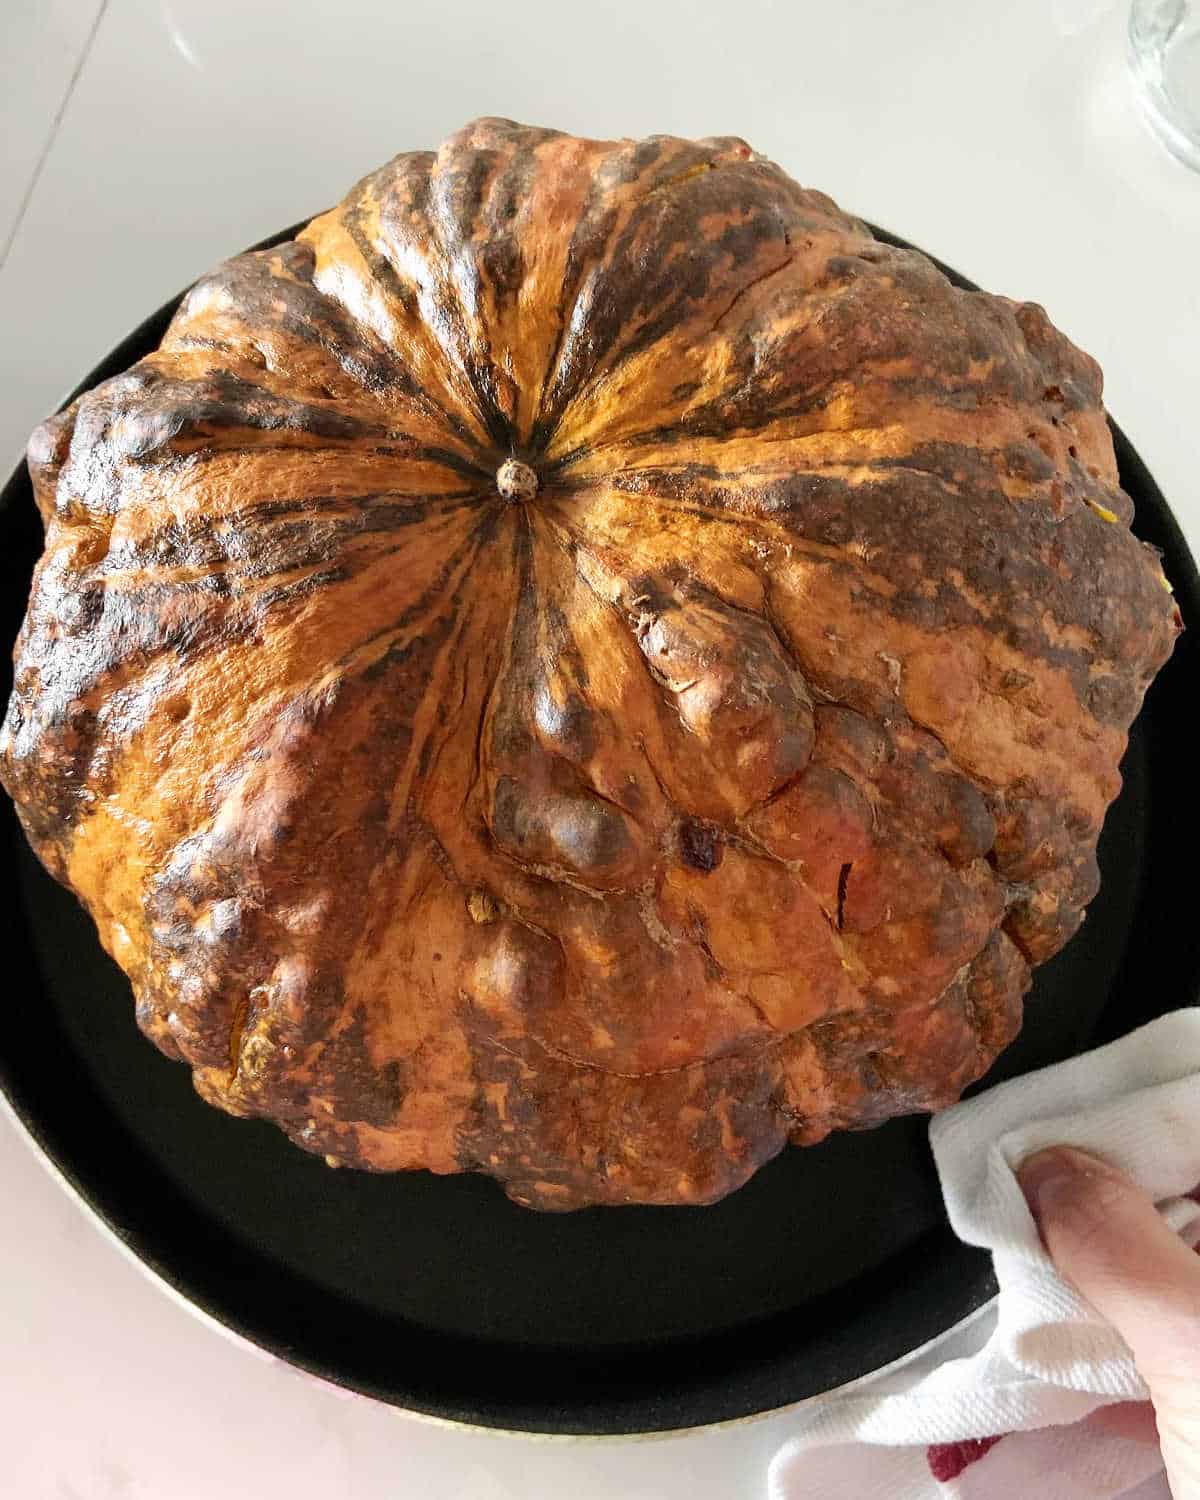 Whole baked pumpkin on a dark round pan on a white surface.